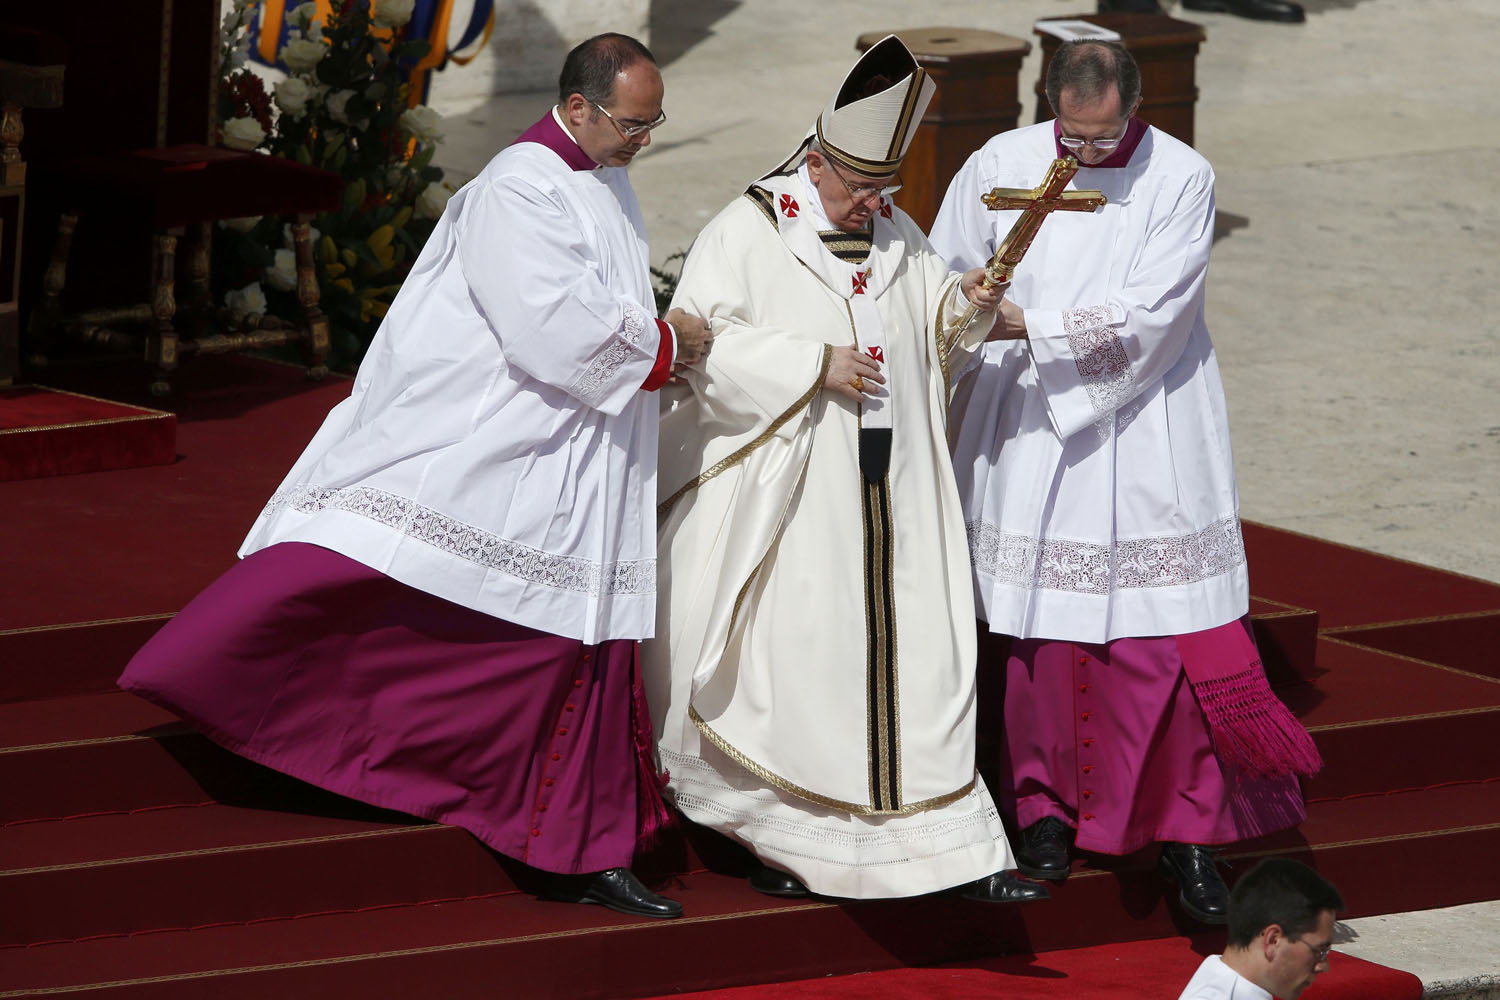 Pope Francis descends the stairs as he takes part in his inaugural mass in Saint Peter's Square at the Vatican